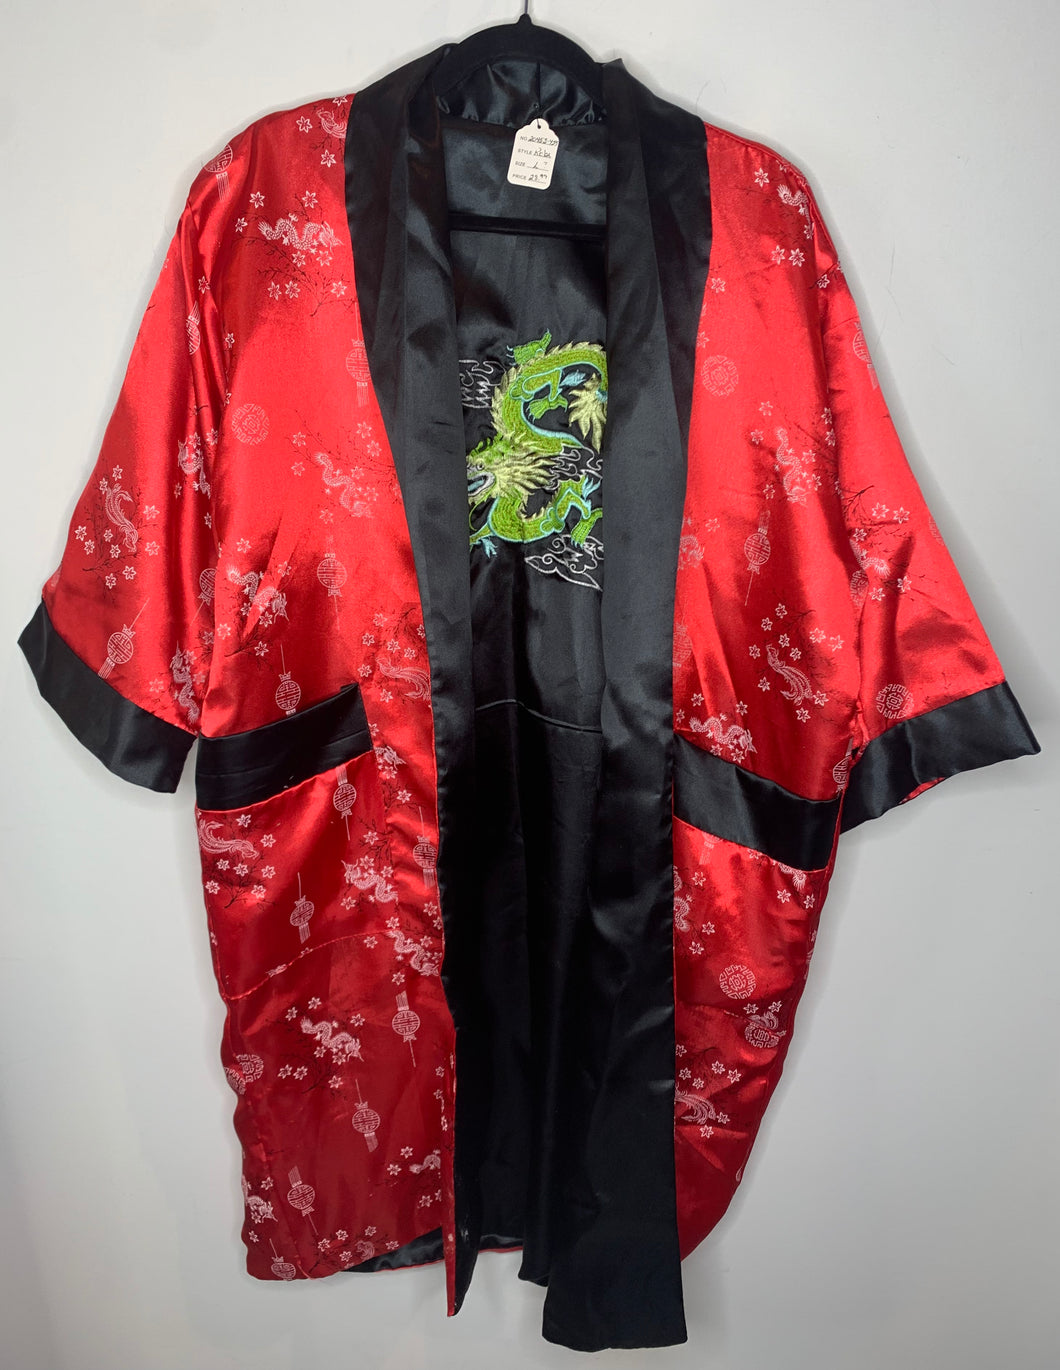 Red and Black Dragon Print Reversible Robe